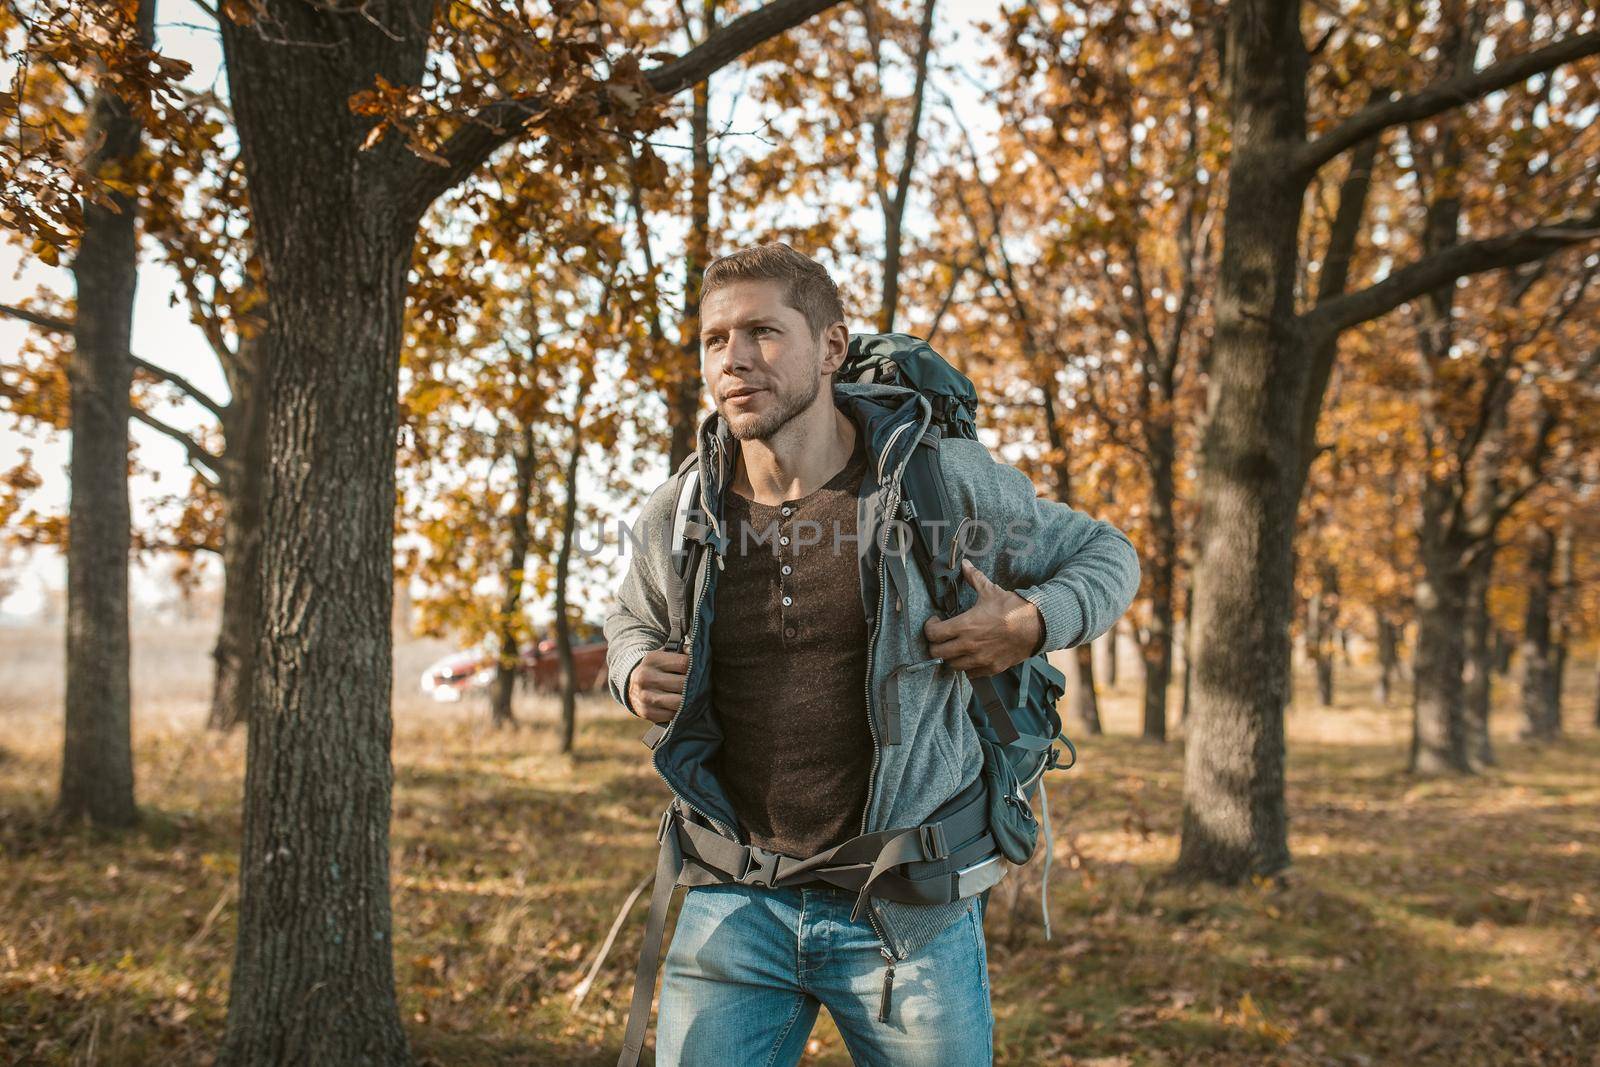 Tourist at the beginning of the journey. An inspired guy with a big backpack got out of a red car and begins his journey through the autumn forest. Hiking concept by LipikStockMedia